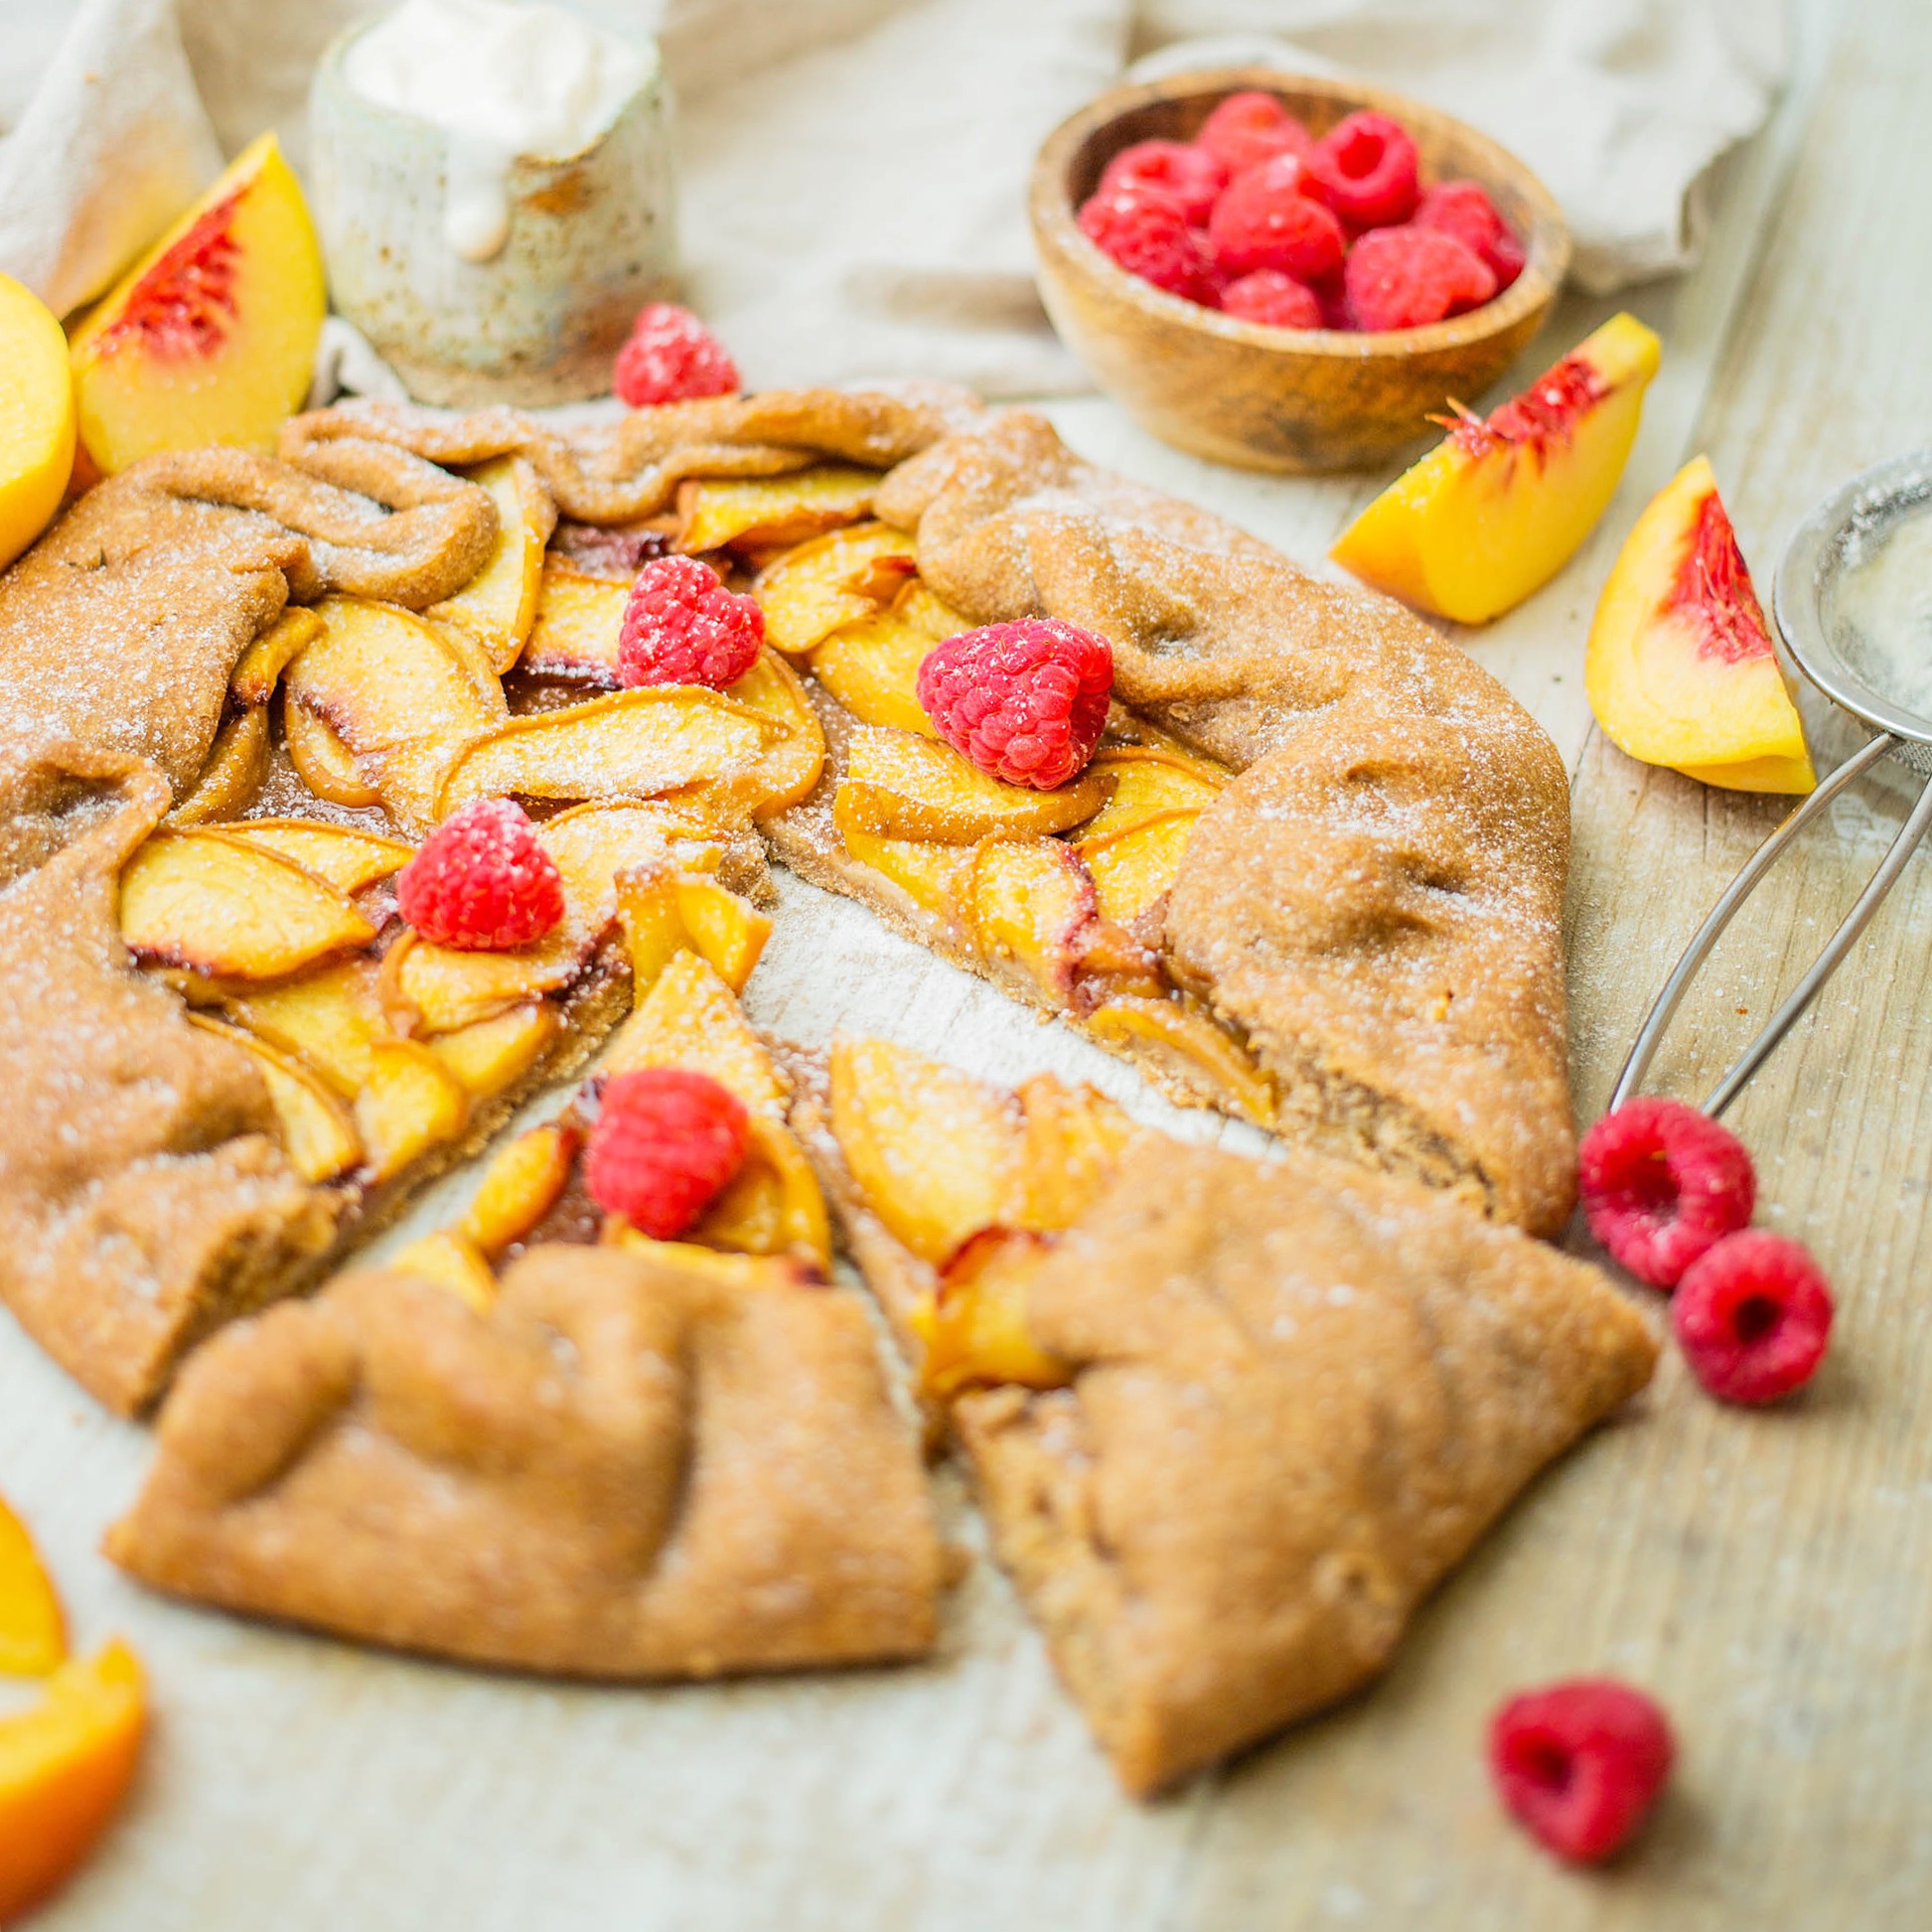 Vegan Peach Gallette with homemade spelt and buckwheat pastry